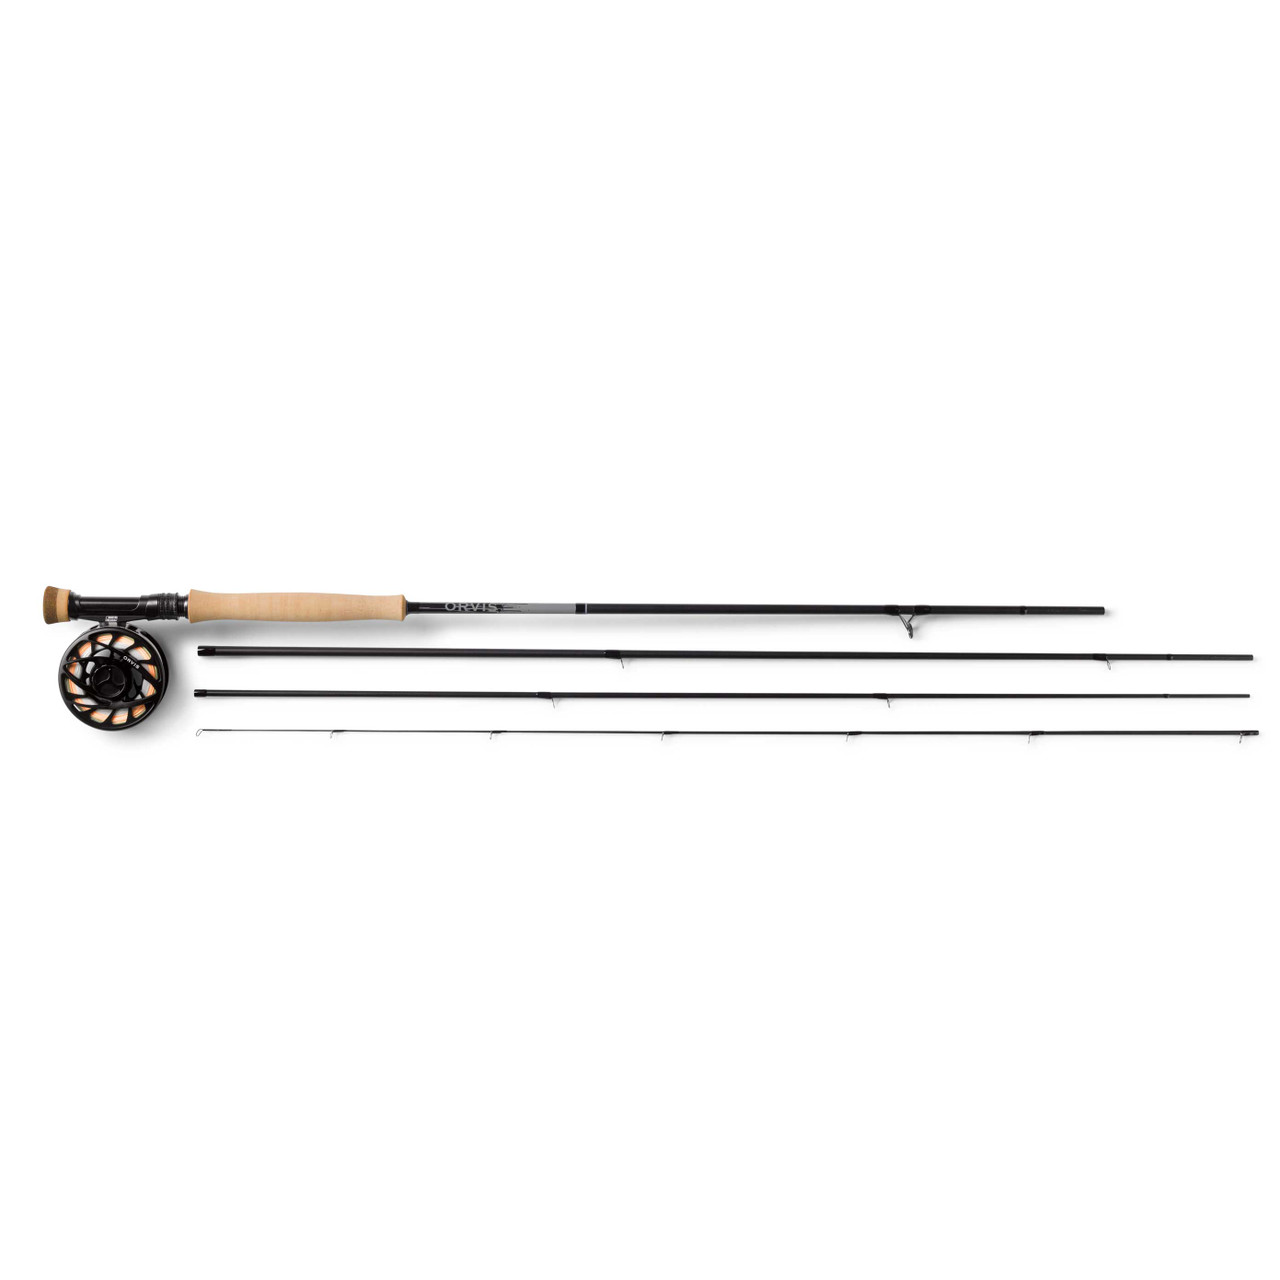 Orvis Fly Fishing Rods / FREE STANDARD US SHIPPING / Orvis Helios